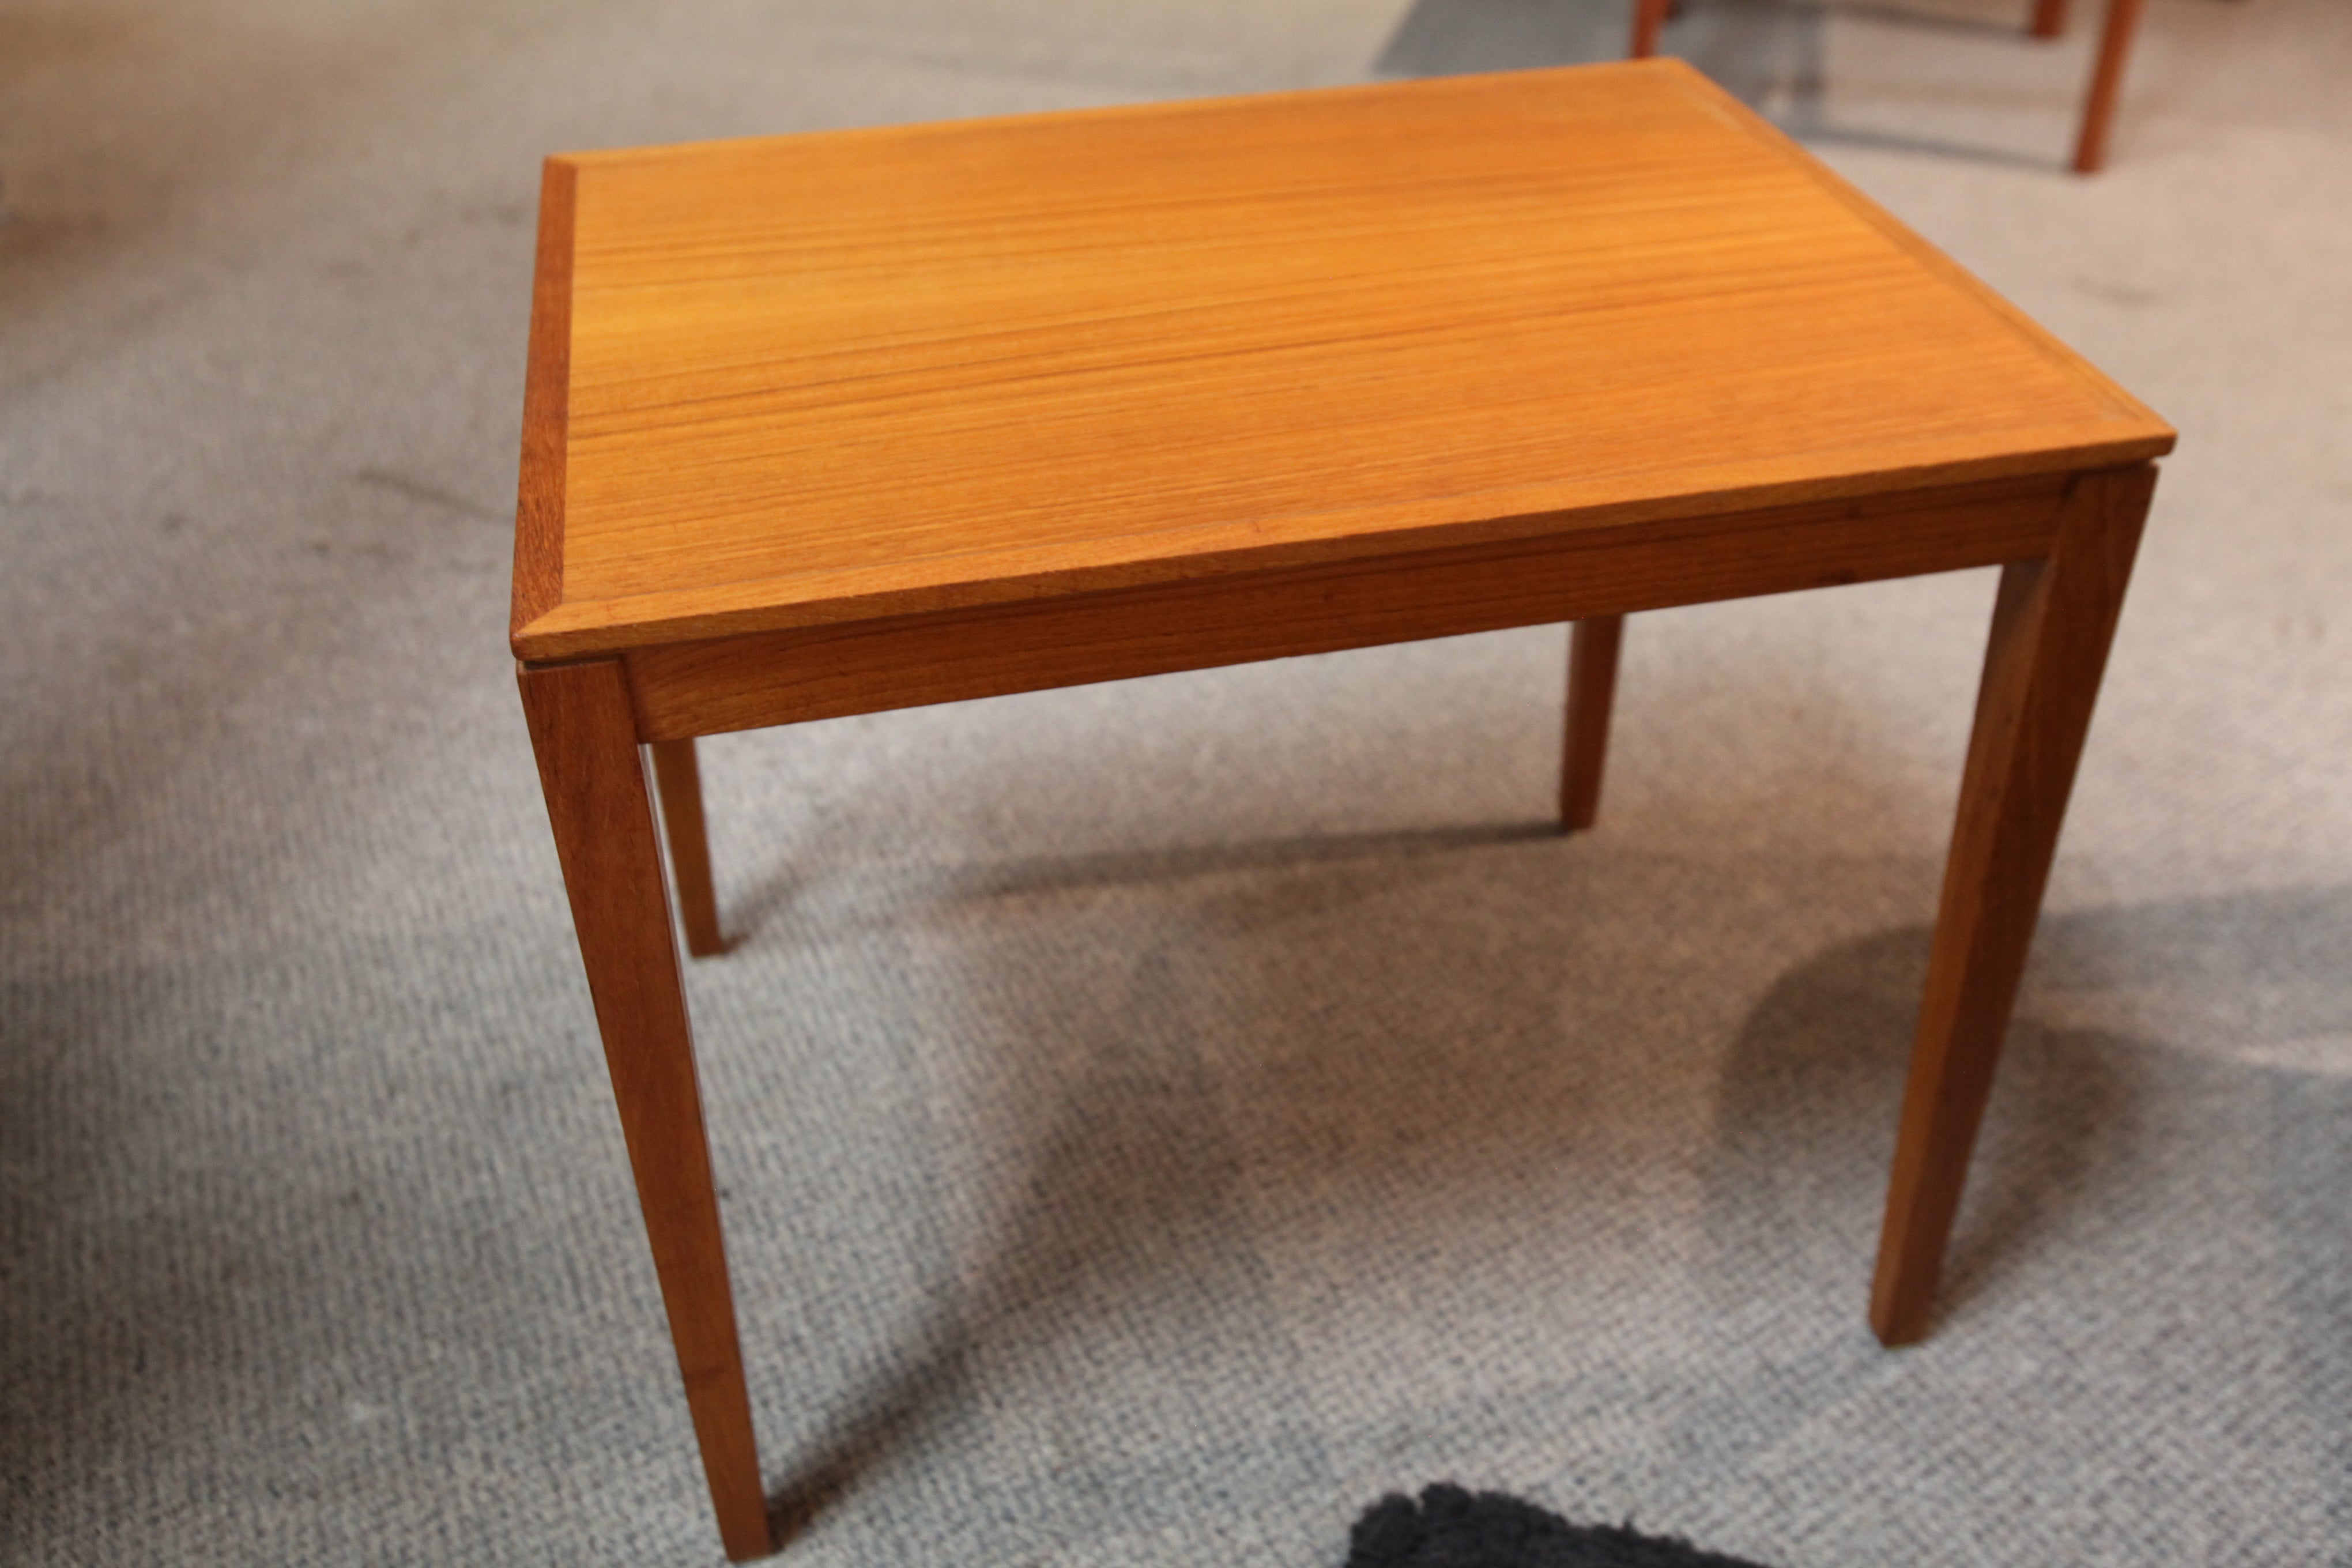 Small Vintage Danish Teak Side Table by Bent Silberg (20.5"x15.75"x17.5"H)